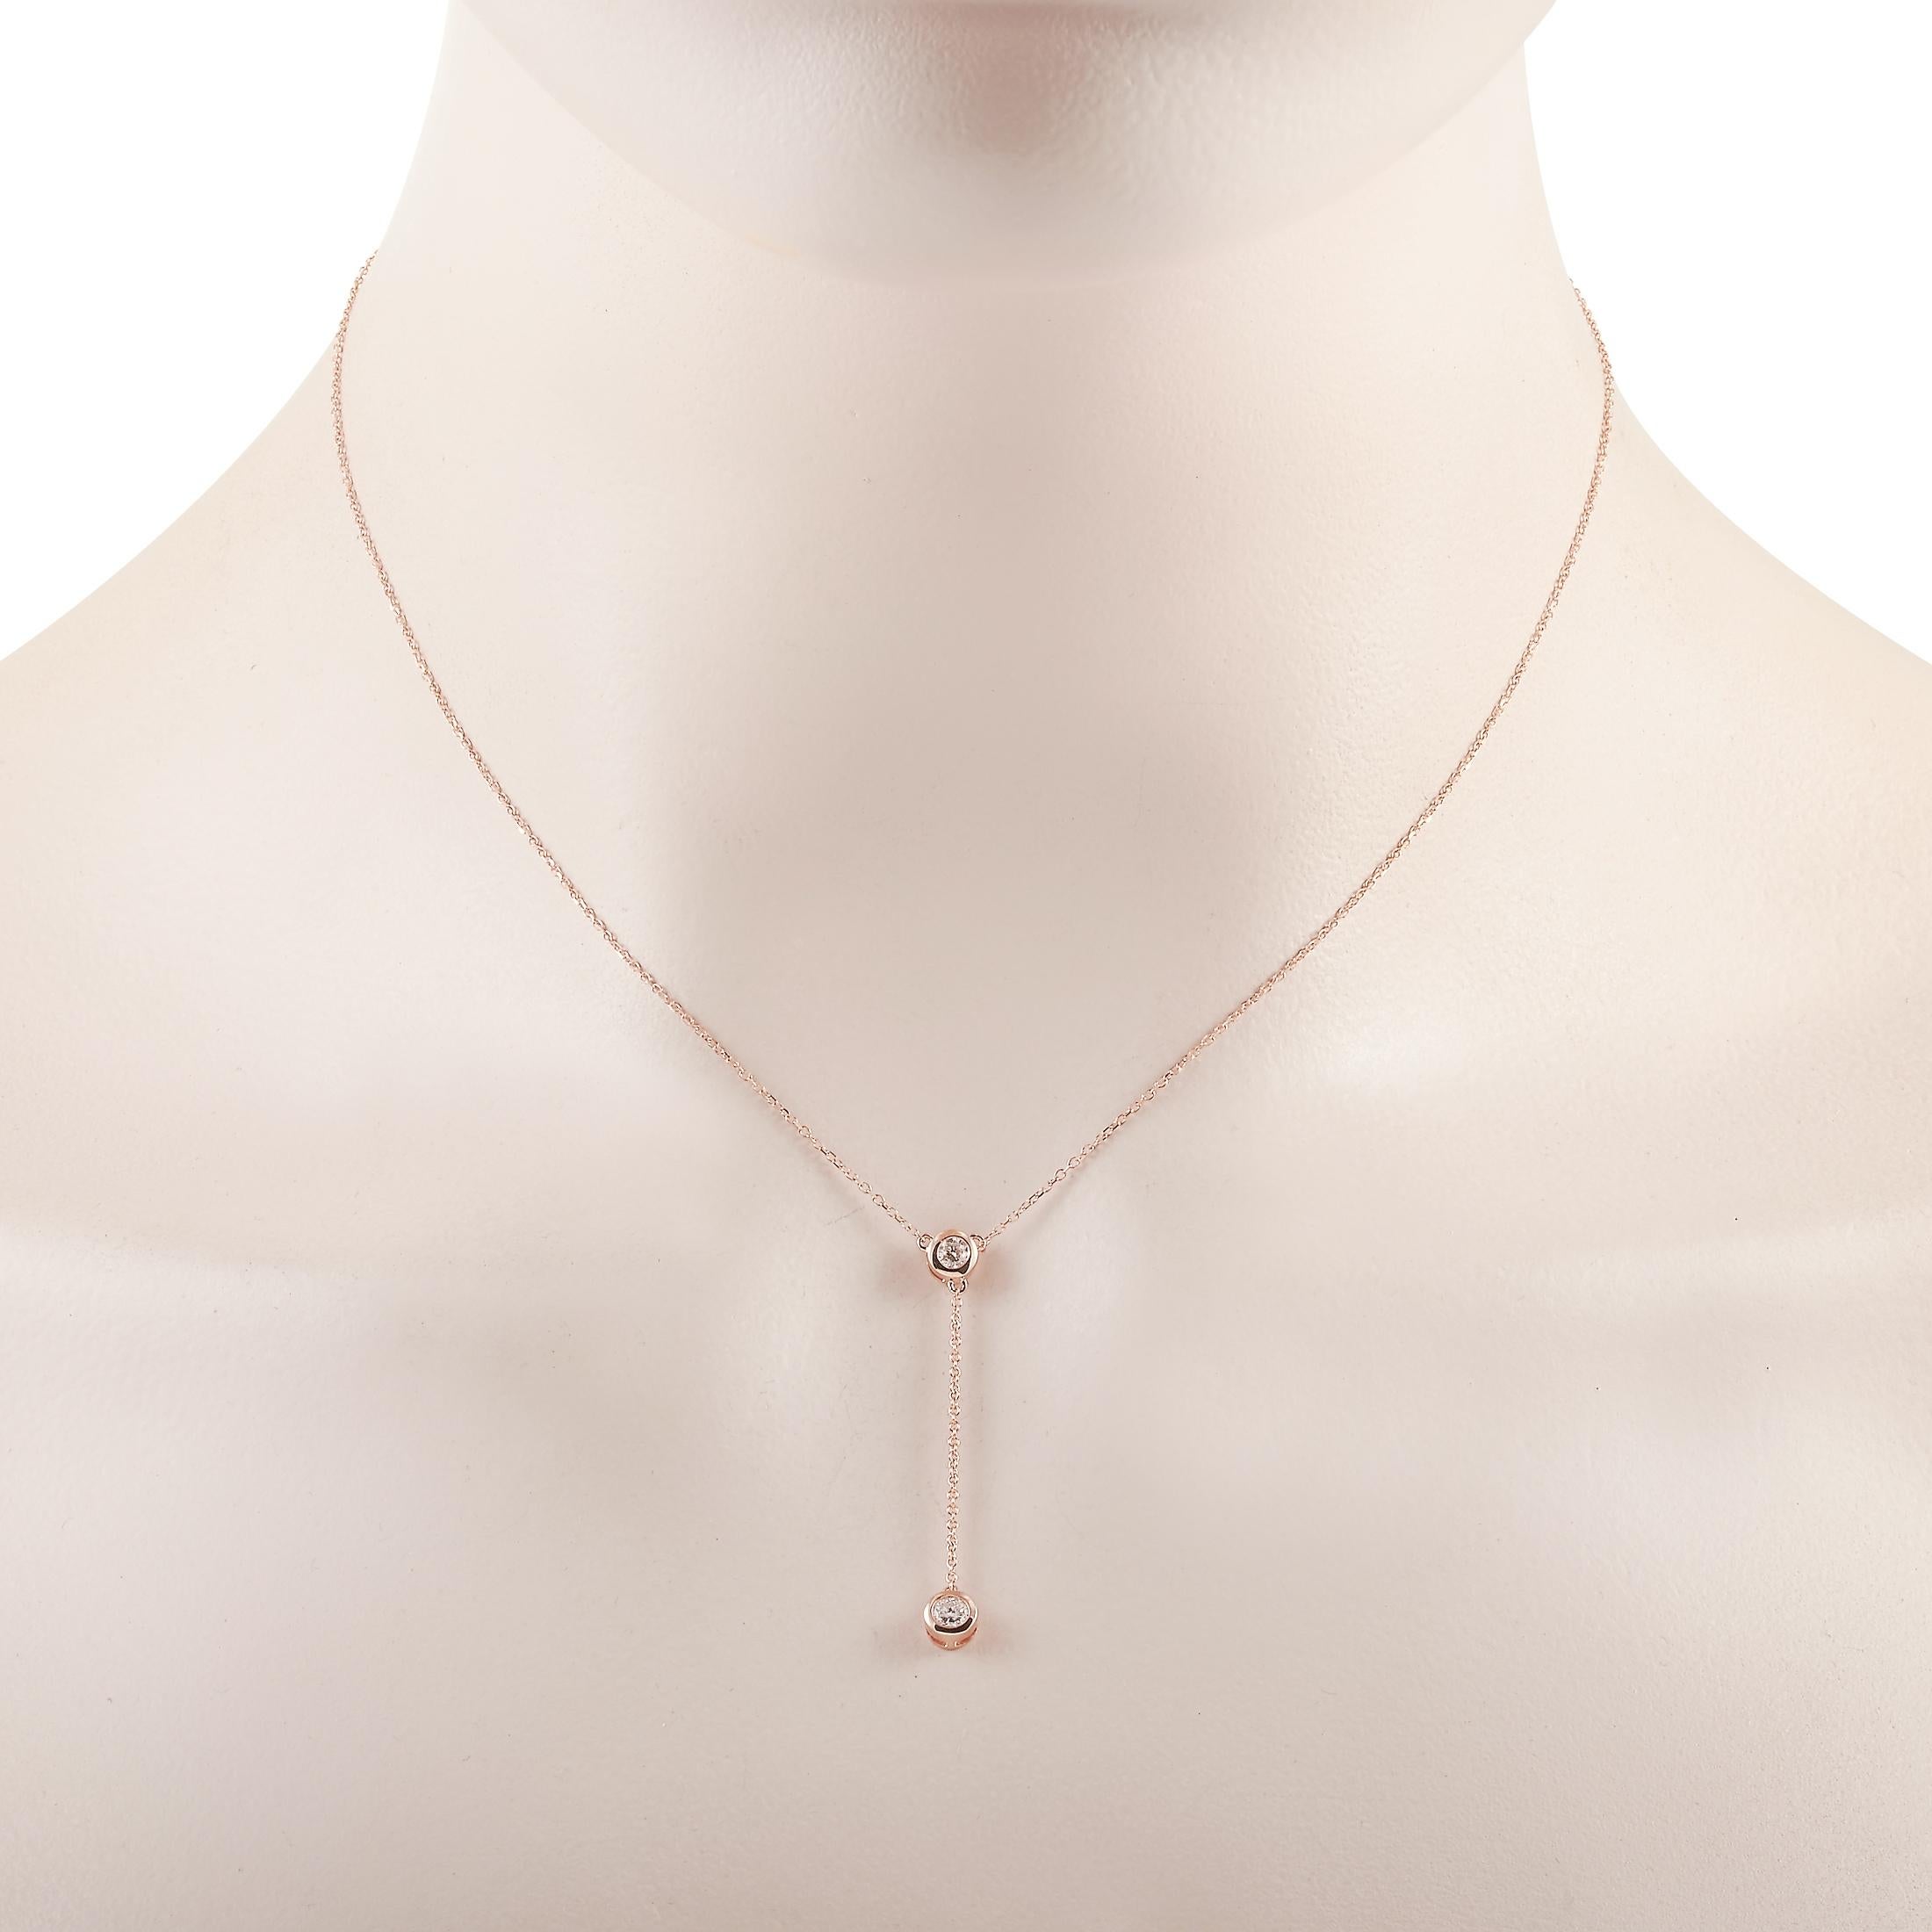 This LB Exclusive necklace is made of 14K rose gold and embellished with diamonds that total 0.20 carats. The necklace weighs 1.7 grams and boasts a 15” chain and a pendant that measures 1.50” in length and 0.13” in width.
 
 Offered in brand new